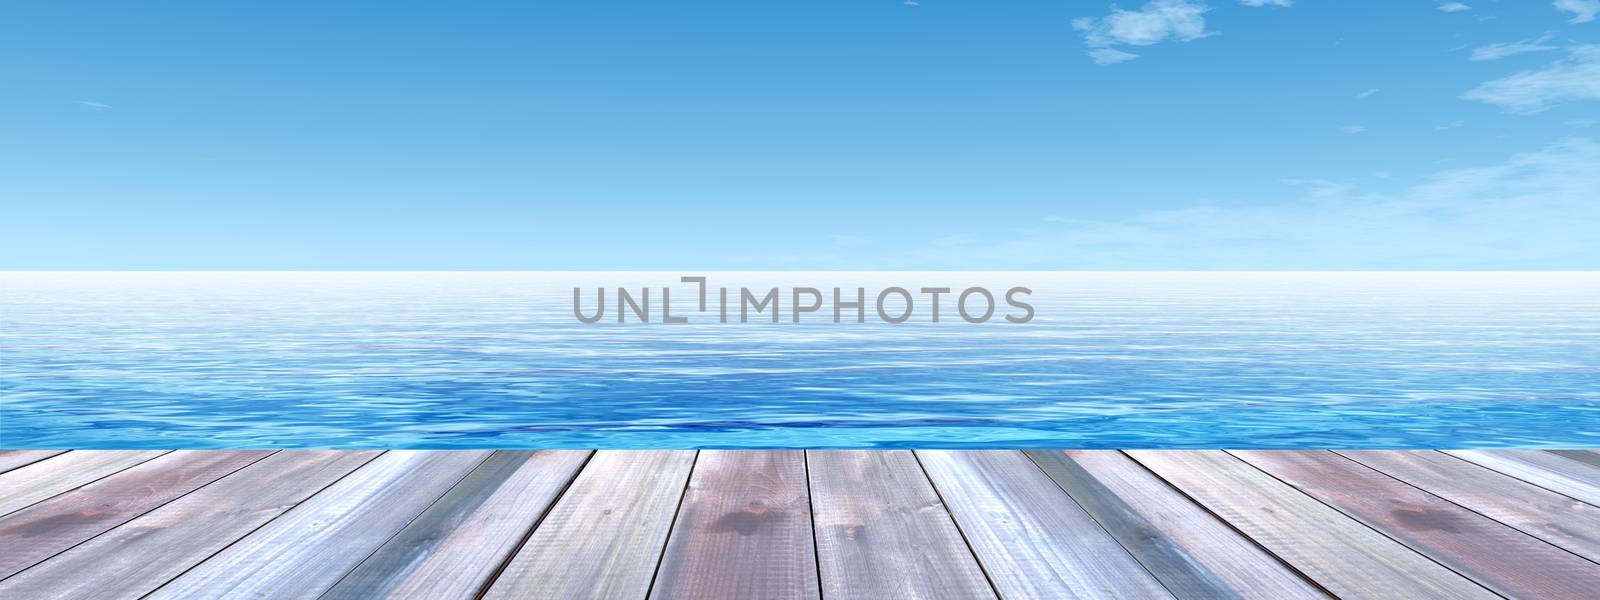 Concept or conceptual wood deck over blue sea and sky background banner